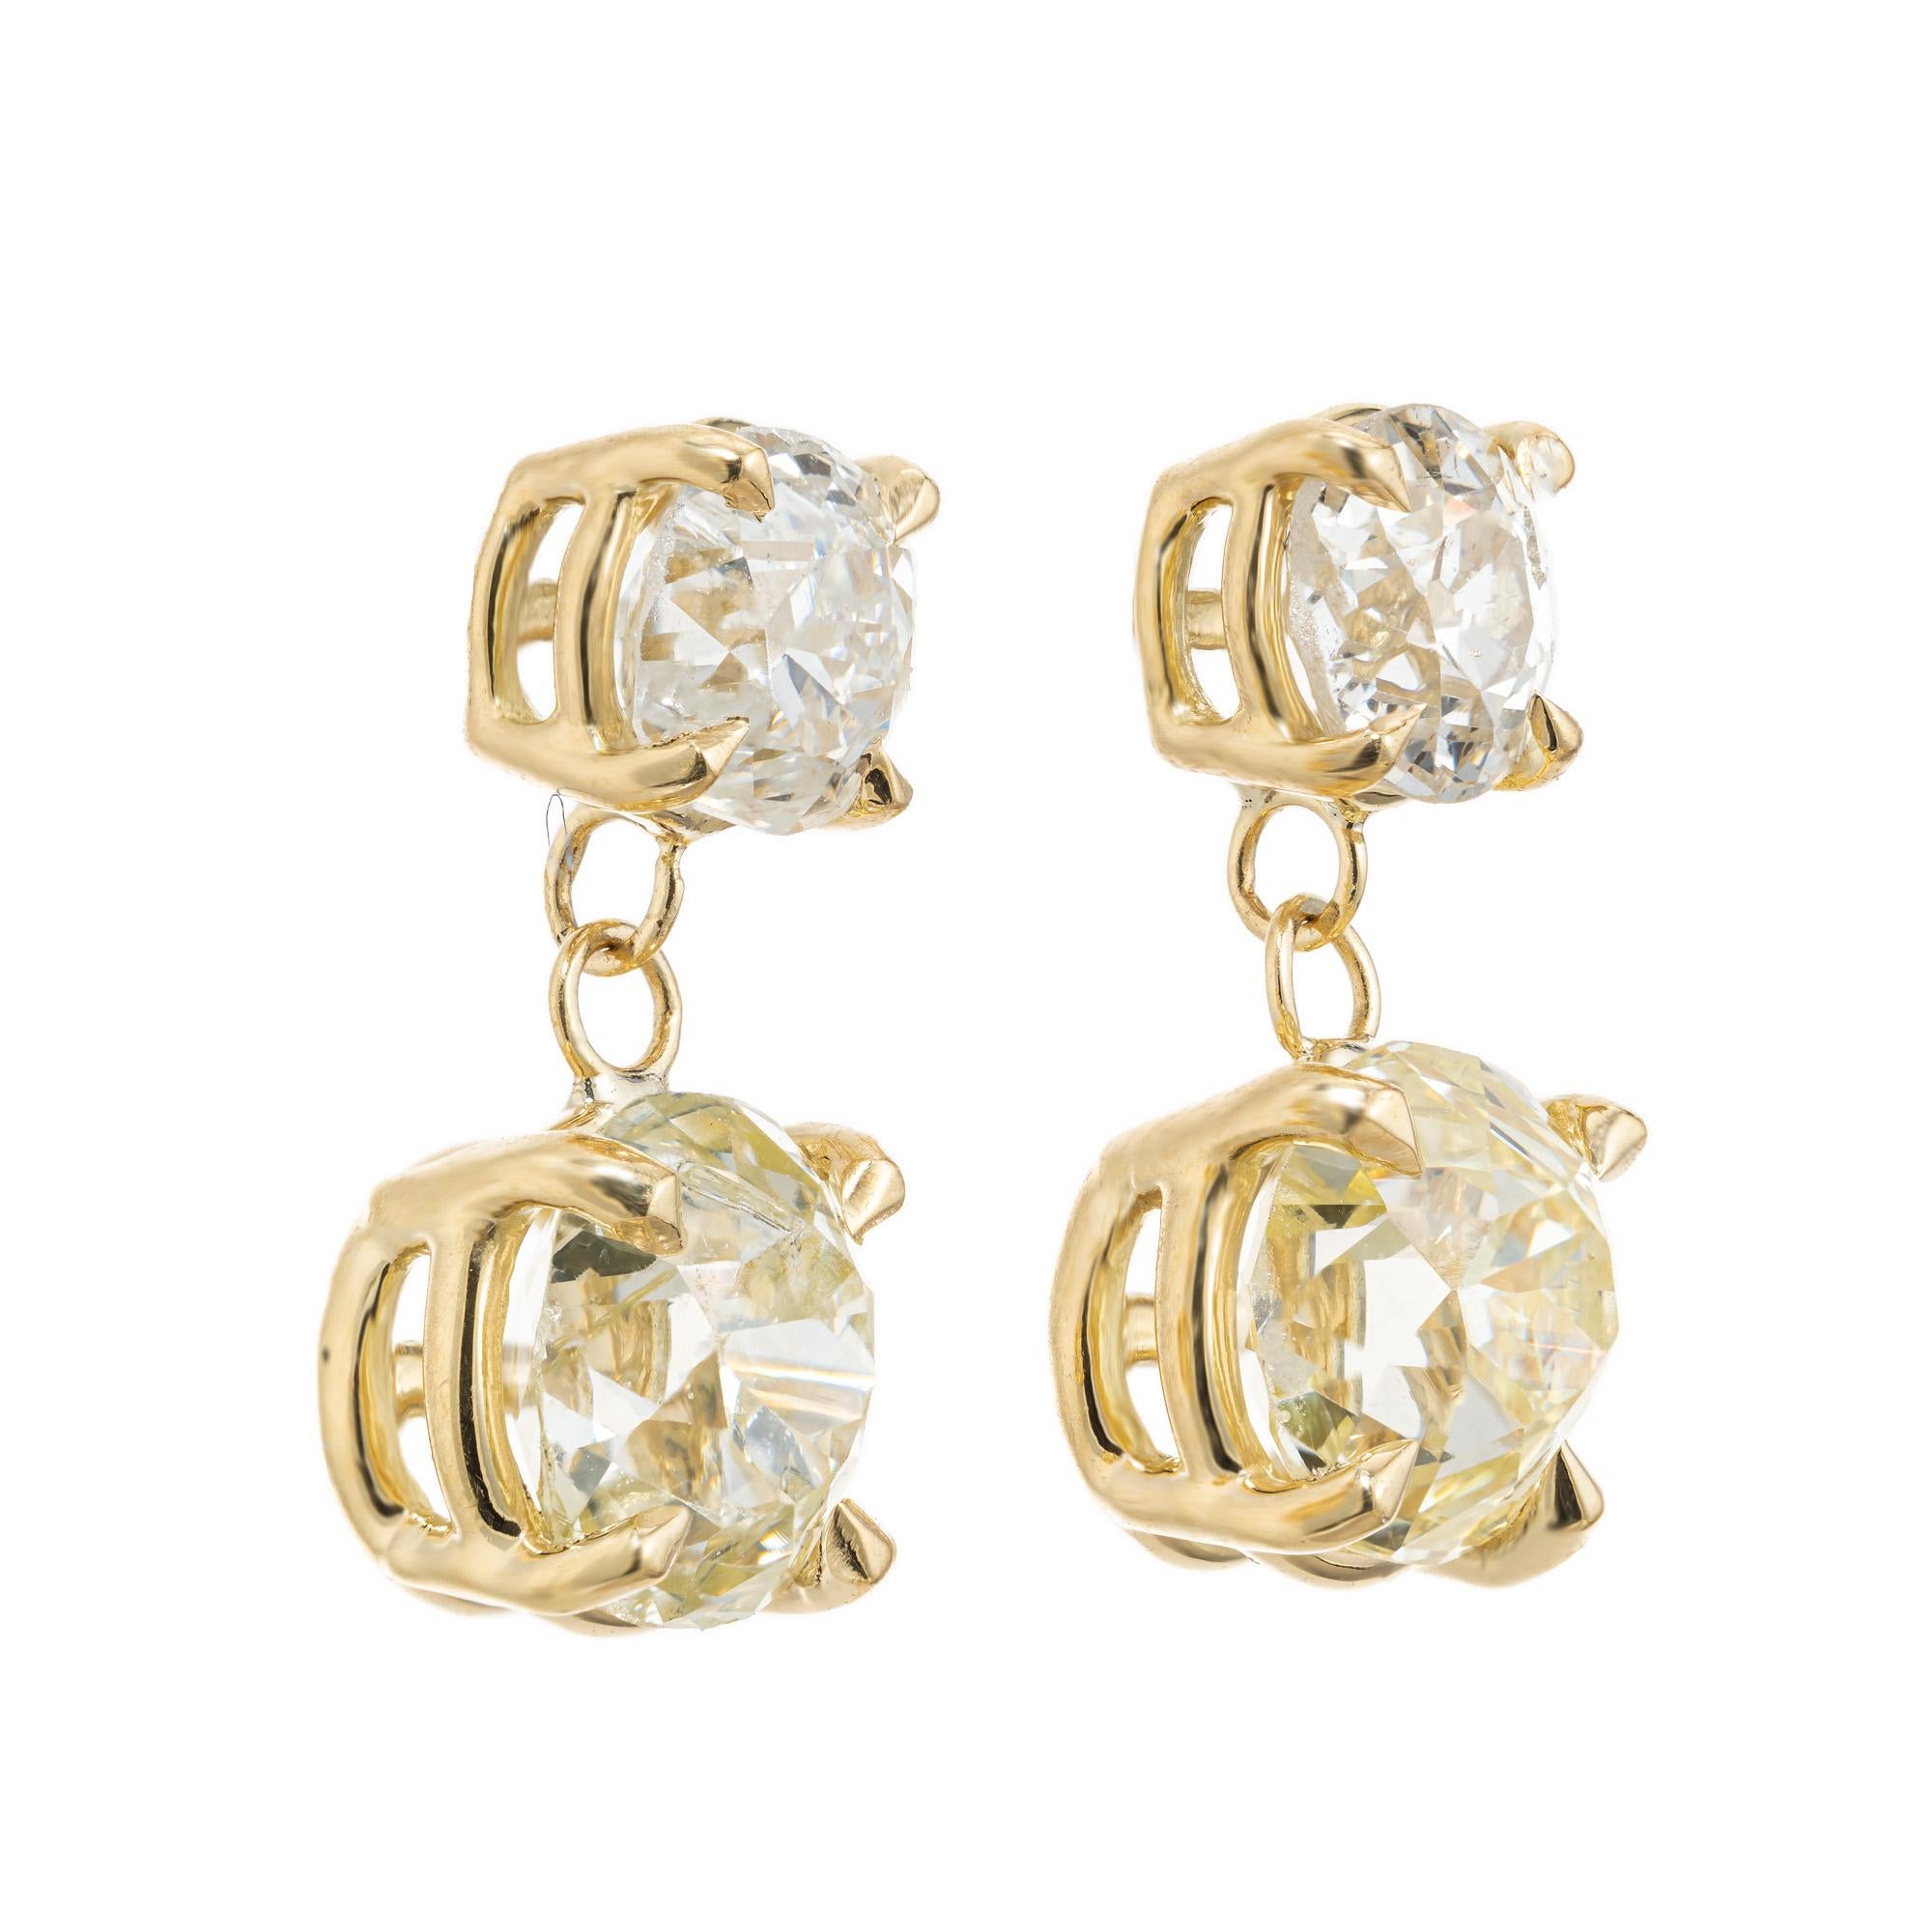 Diamond dangle earrings. 4 old mine brilliant cut diamonds set in four prong basket settings. 2 old mine top diamonds with 2 separately GIA certified light yellow well matched old mine brilliant cut diamonds, one at 1.16cts and the other at .98cts.